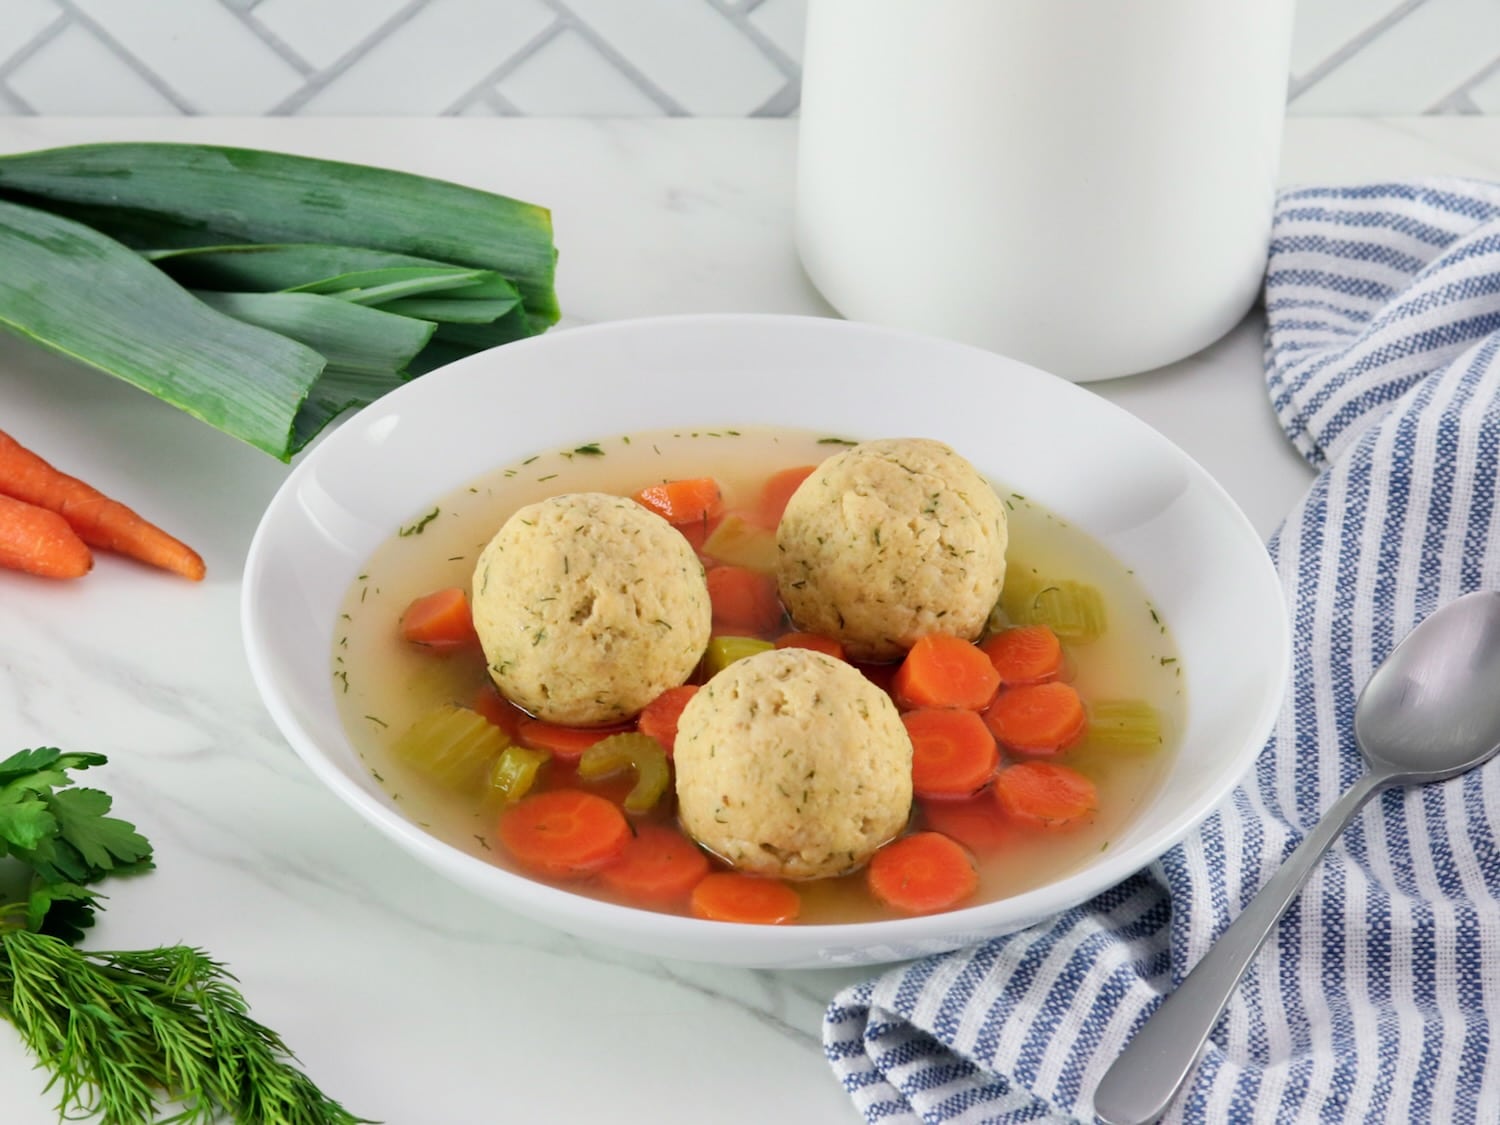 Horizontal shot of floater matzo balls in a shallow bowl of vegetarian matzo ball soup with carrot slices, pieces of celery, and golden saffron broth. Spoon, fresh vegetables, and linen napkin on the white marble counter beside the bowl. Tiles and white jar in background.